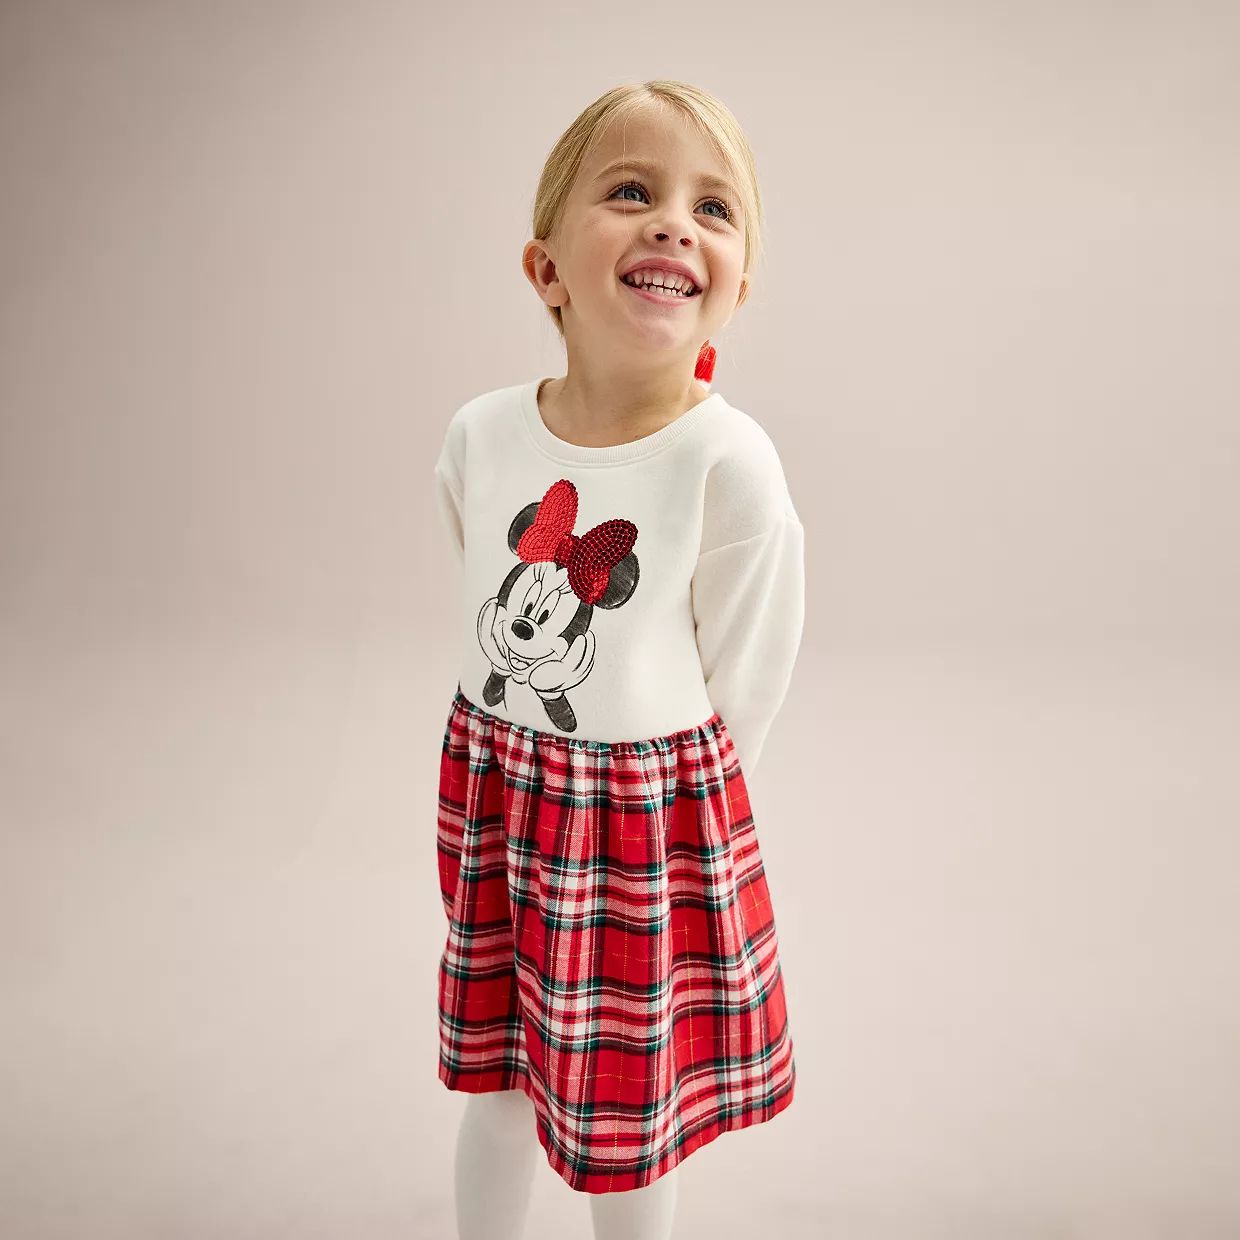 Disney's Minnie Mouse Baby & Toddler Girl Sweatshirt Dress by Jumping Beans® | Kohl's